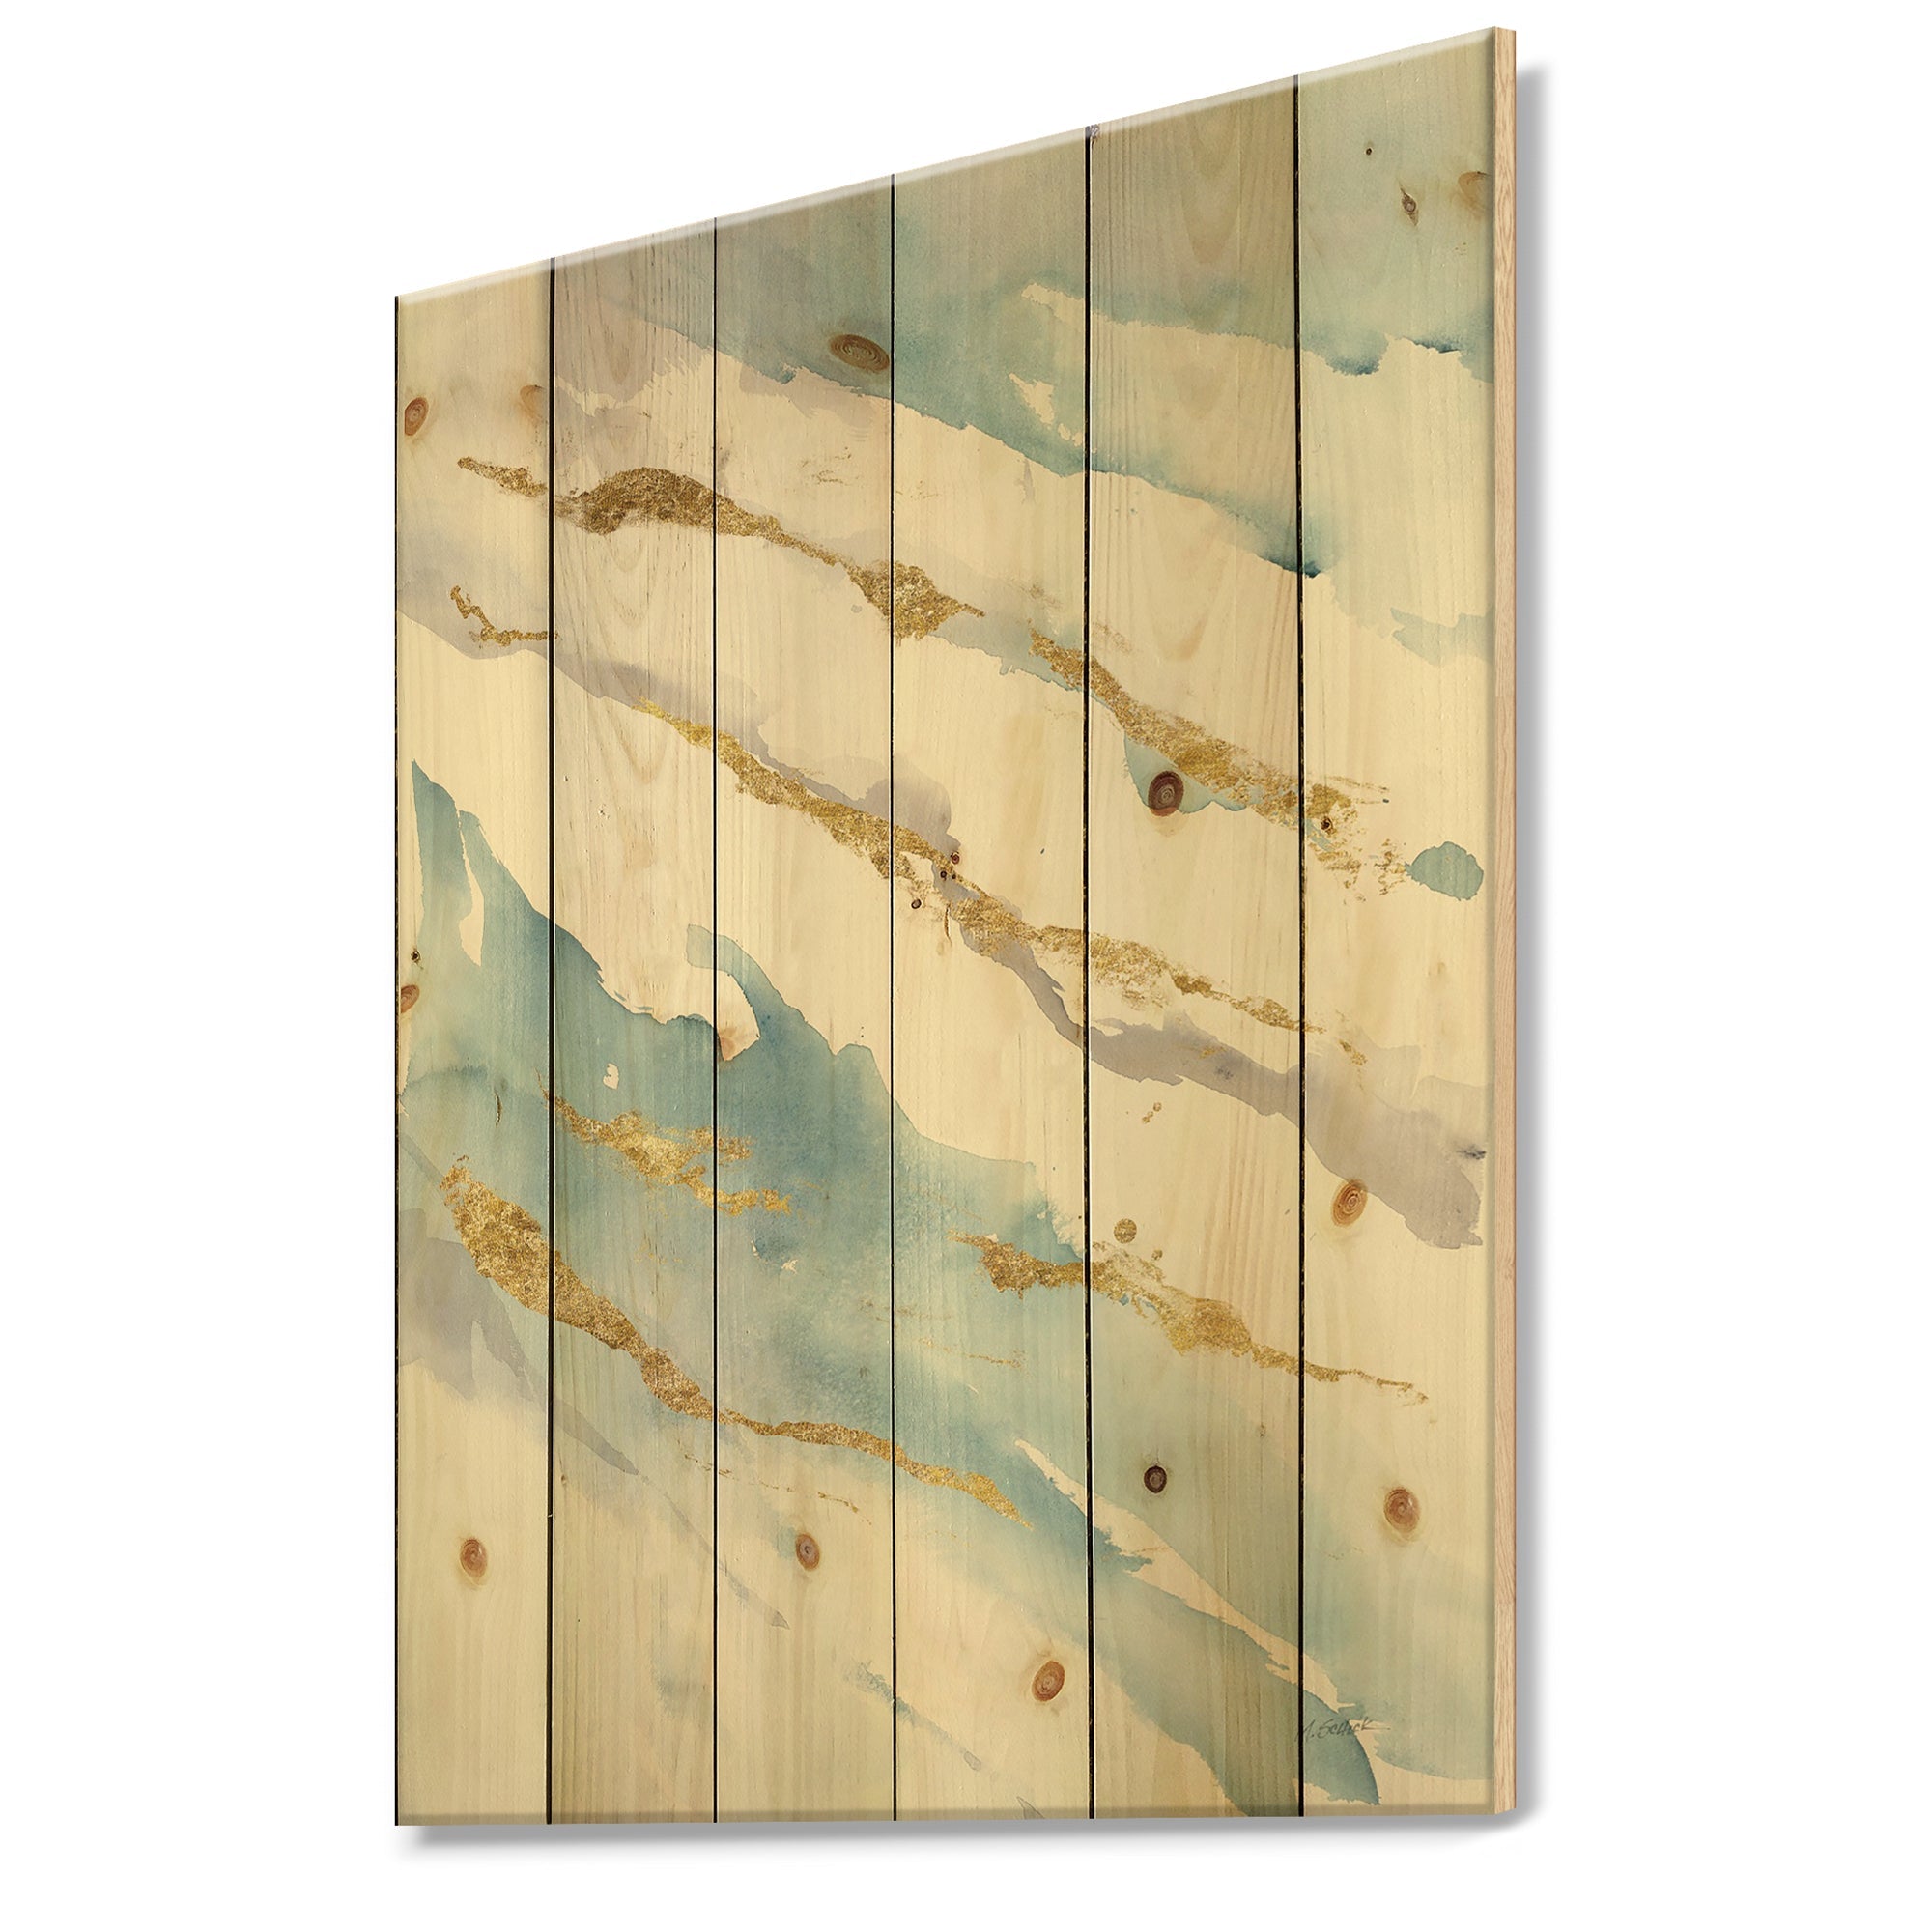 Abstract Drift v2 - Posh & Lux Print on Natural Pine Wood